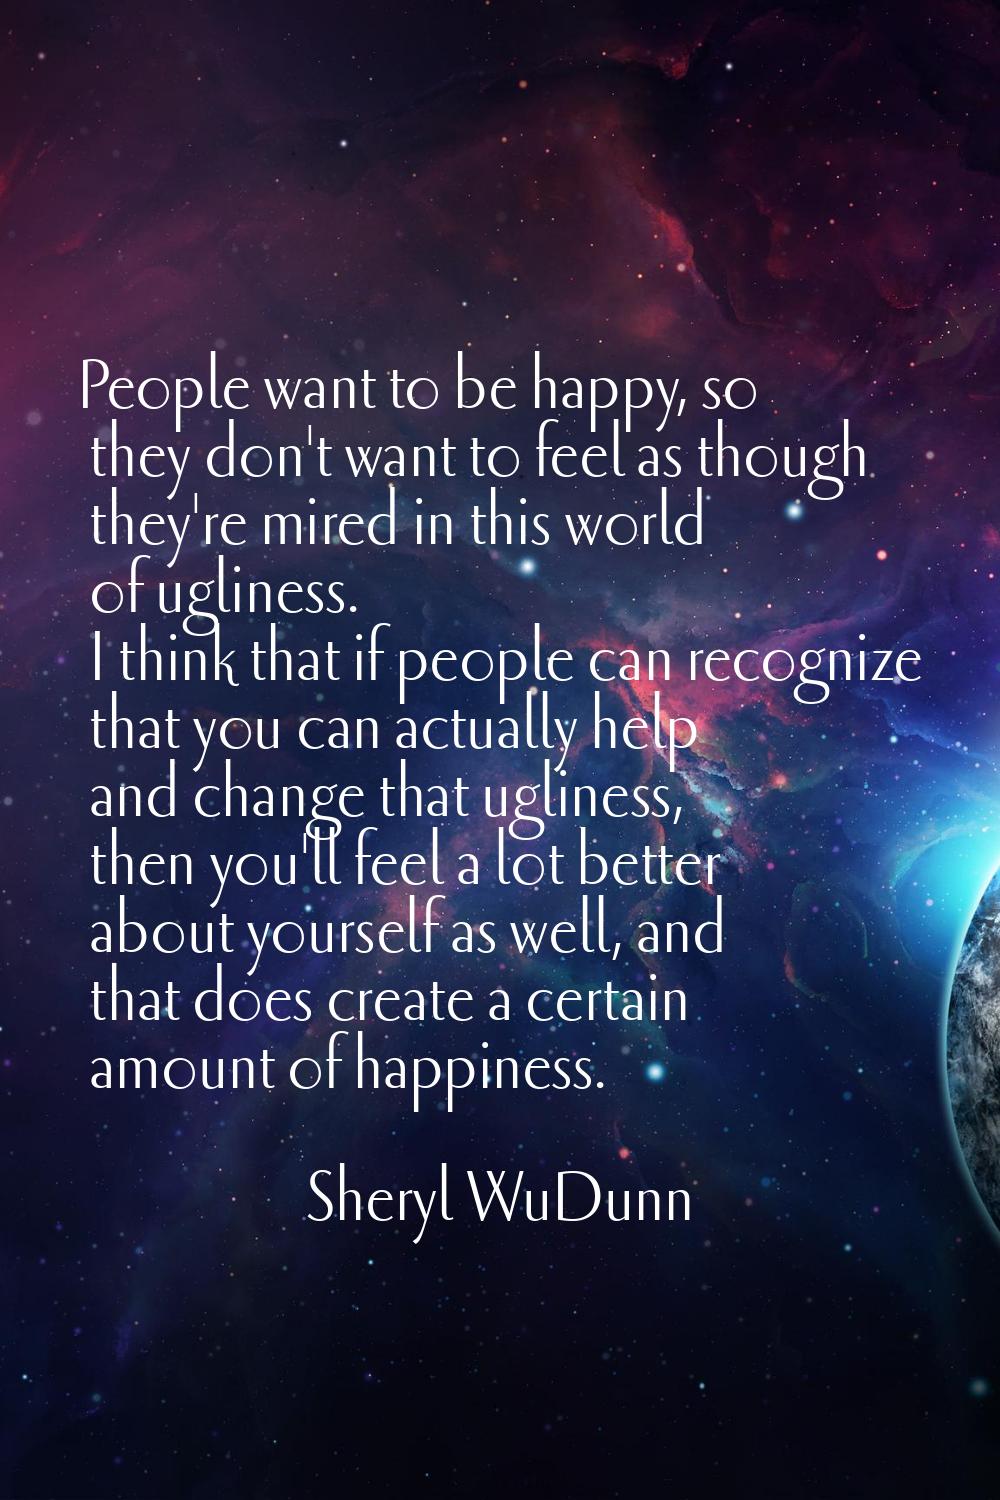 People want to be happy, so they don't want to feel as though they're mired in this world of ugline